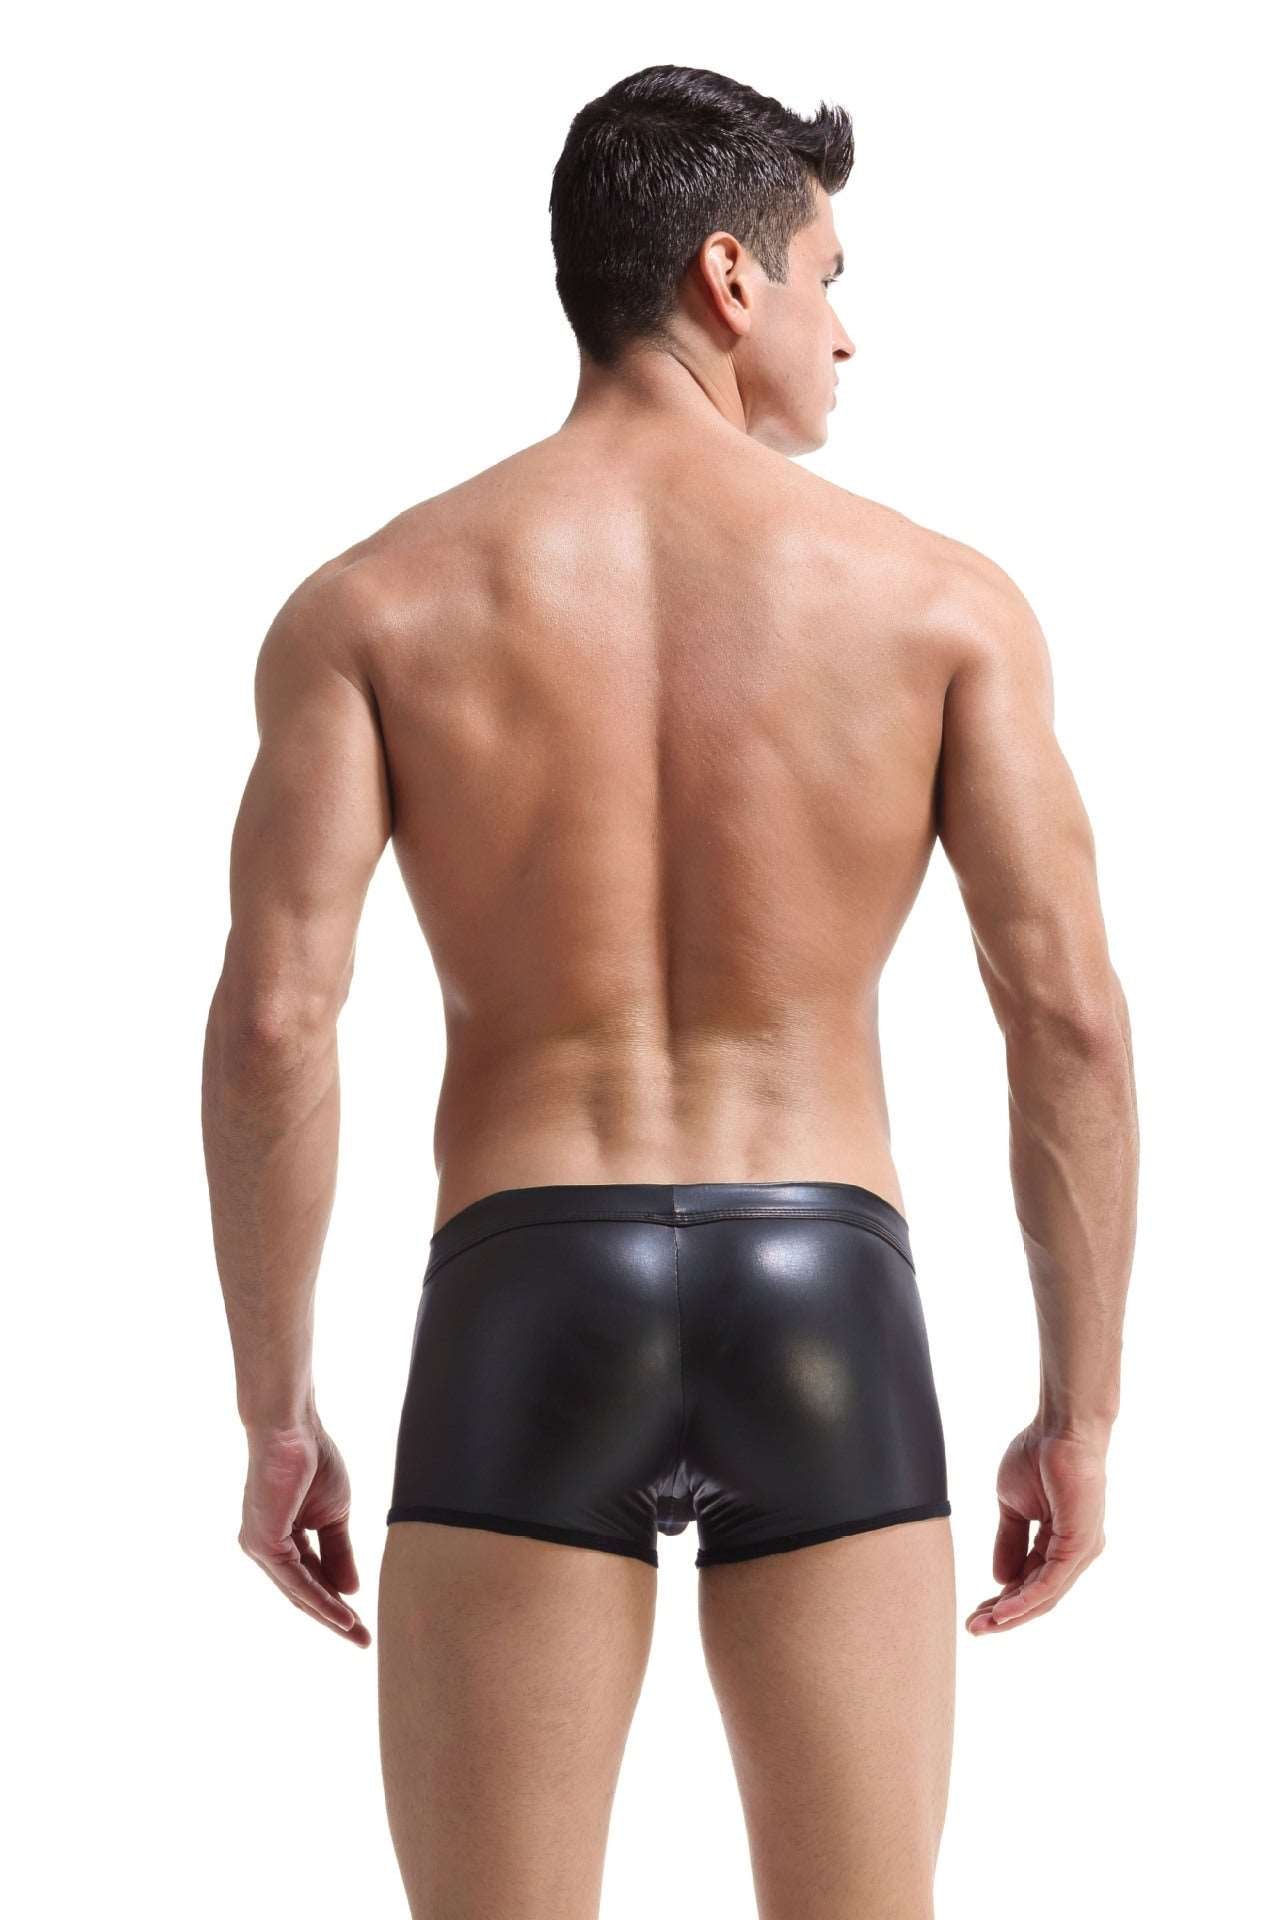 Faux Leather Hoop Patent Leather PU Boxer Briefs Sexy Lingerie